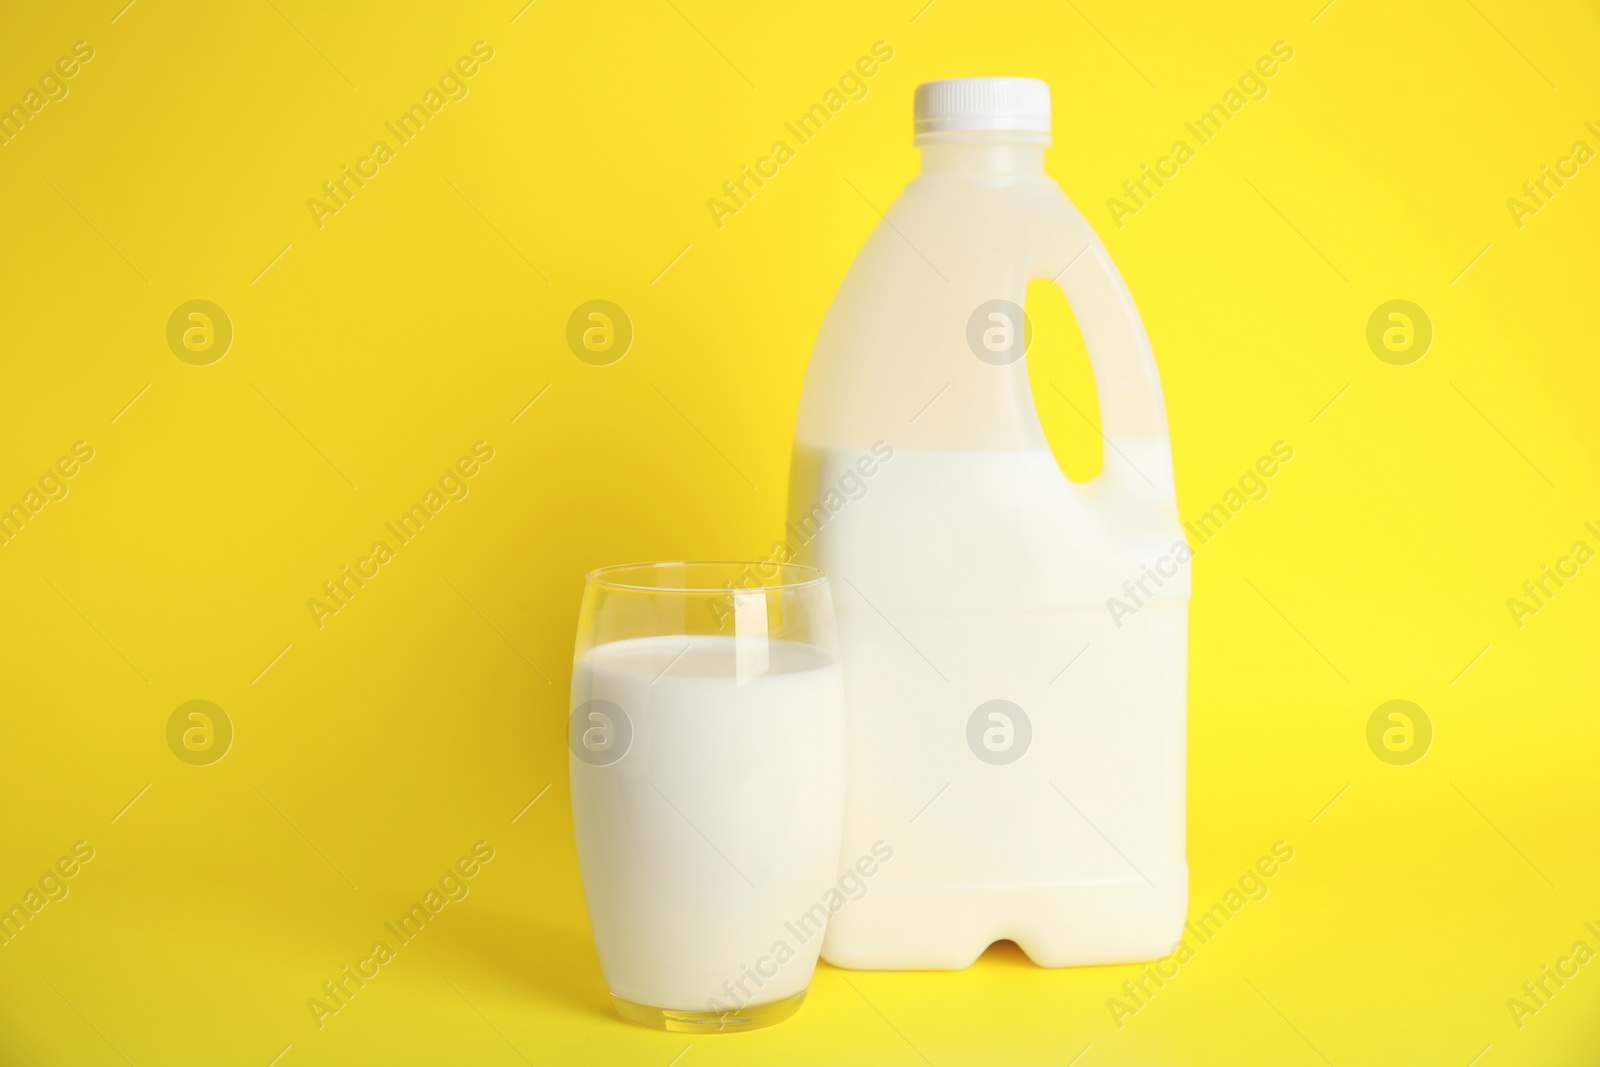 Photo of Gallon bottle and glass of milk on yellow background